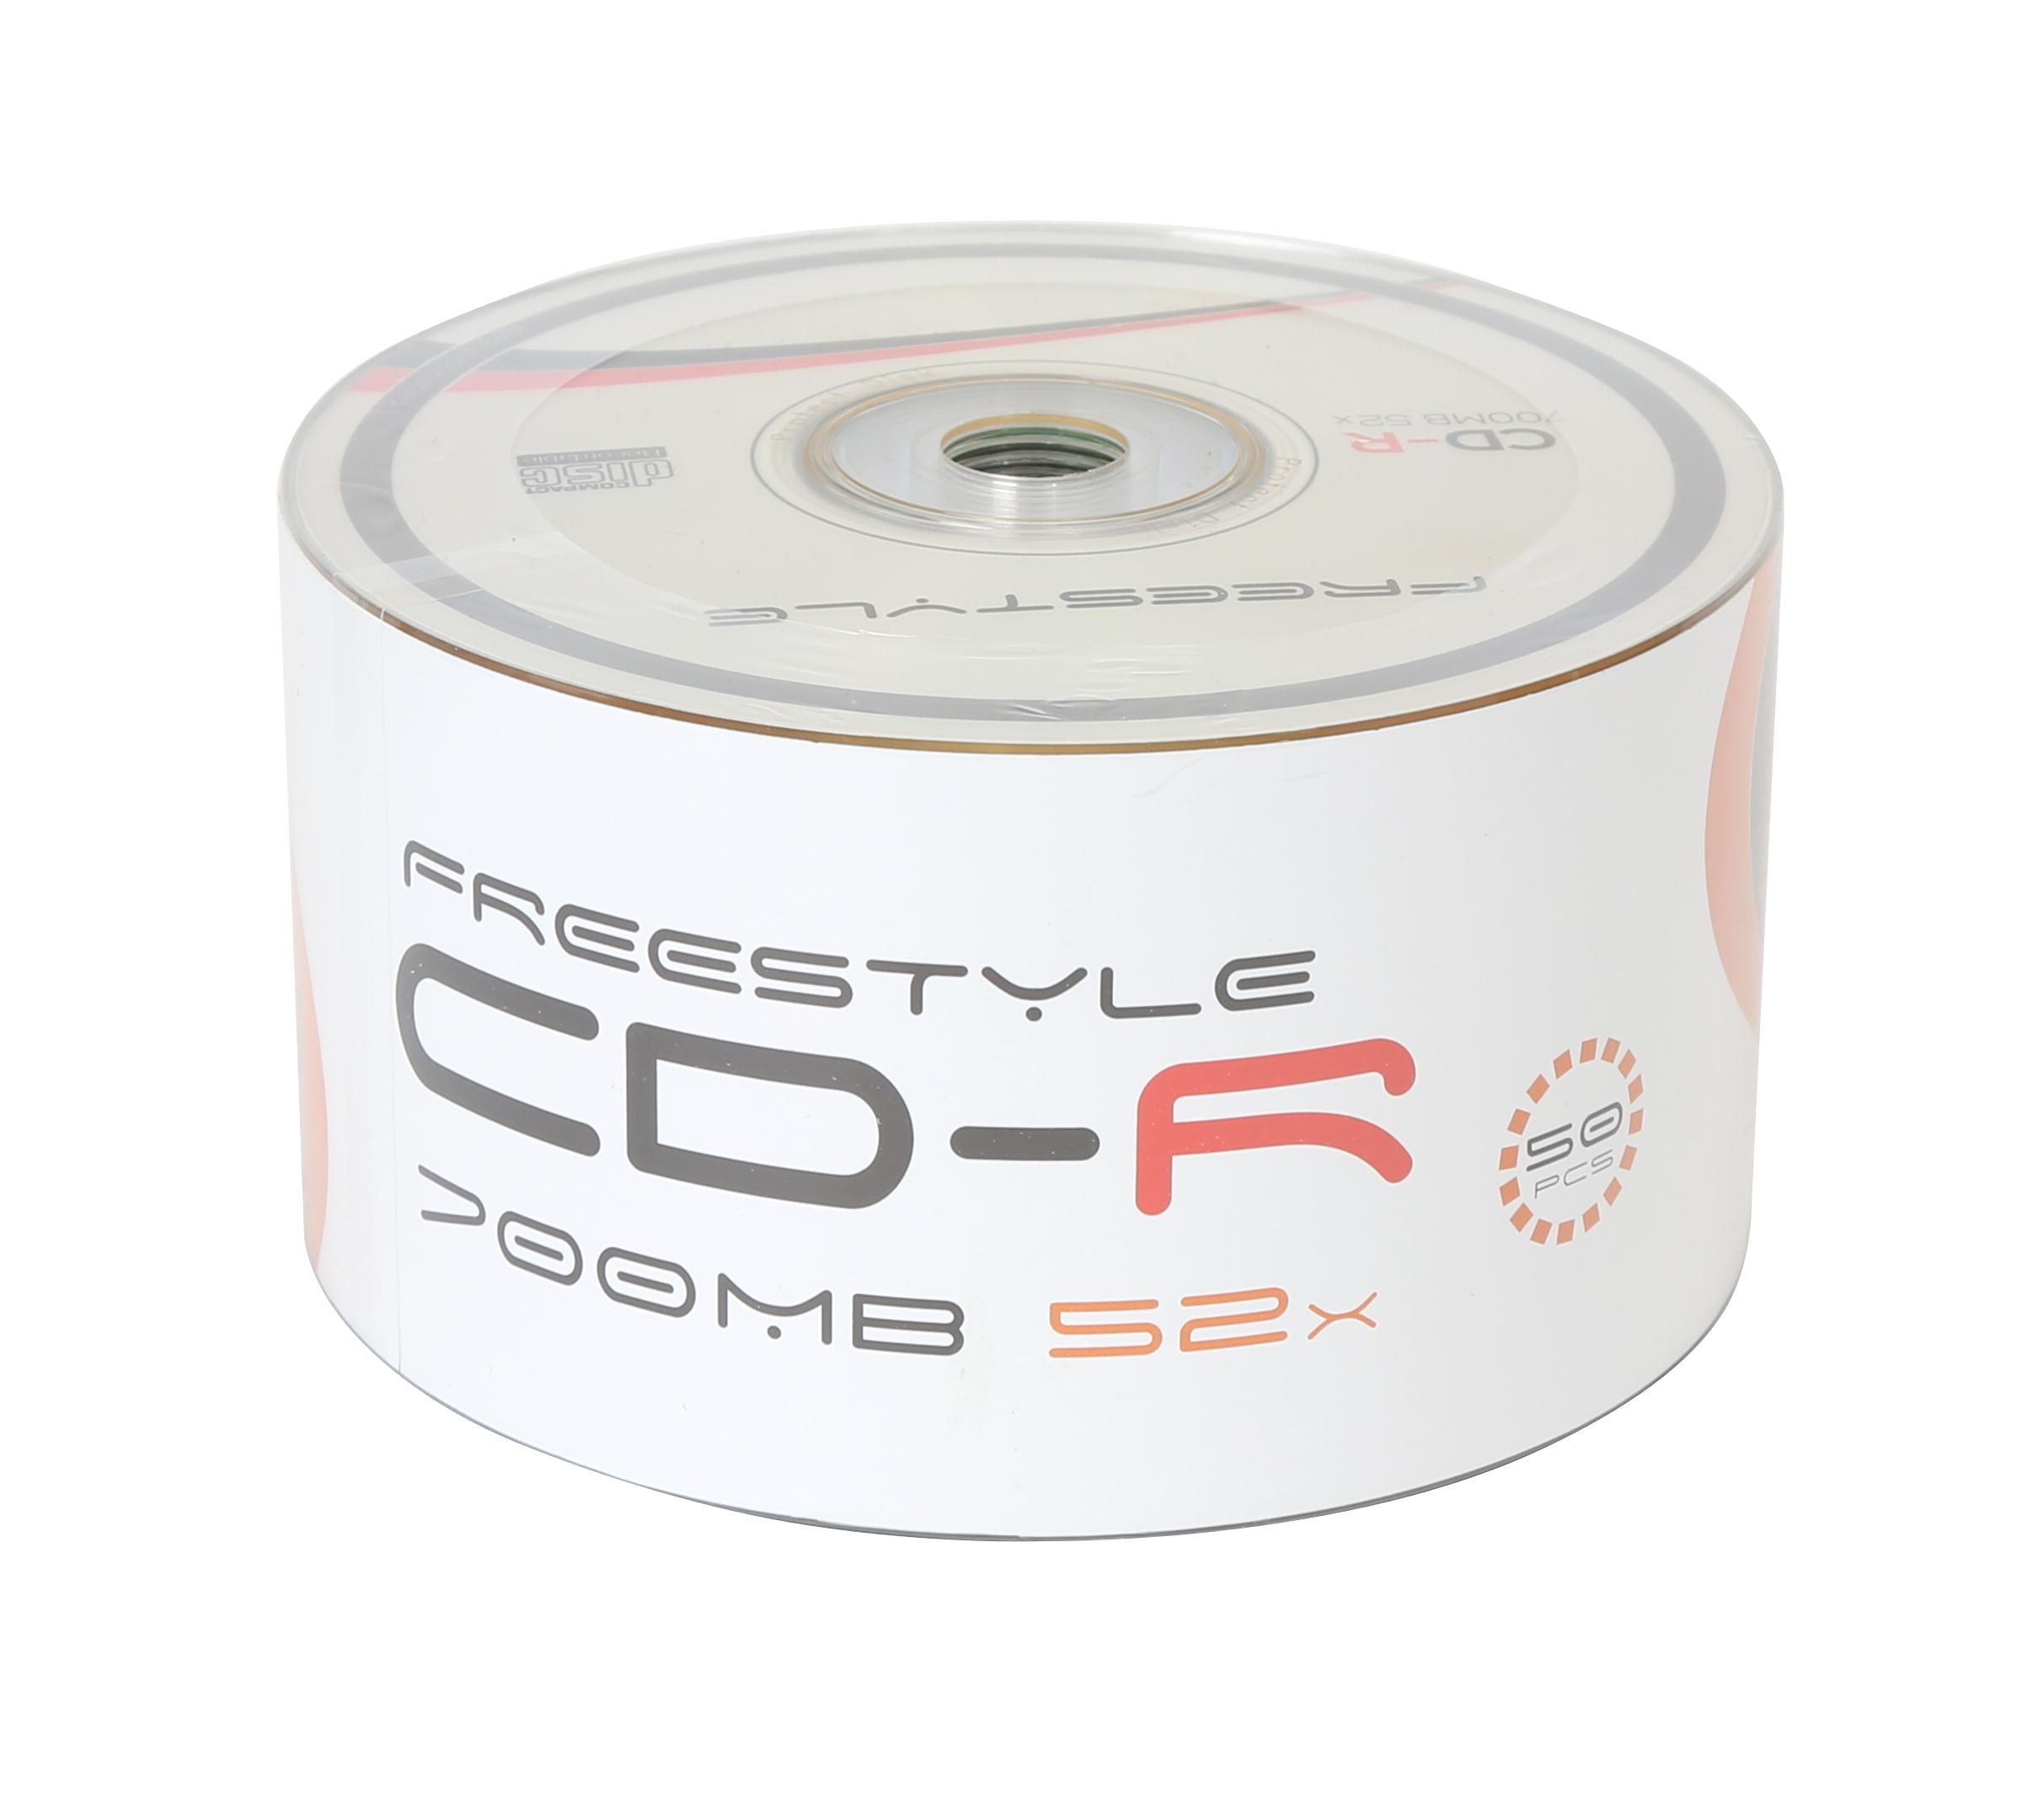 Freestyle - Computer Accs        Cd-r (x50 Pack) 700mb 52x-          -shrink Wrap Packaging              Of50s